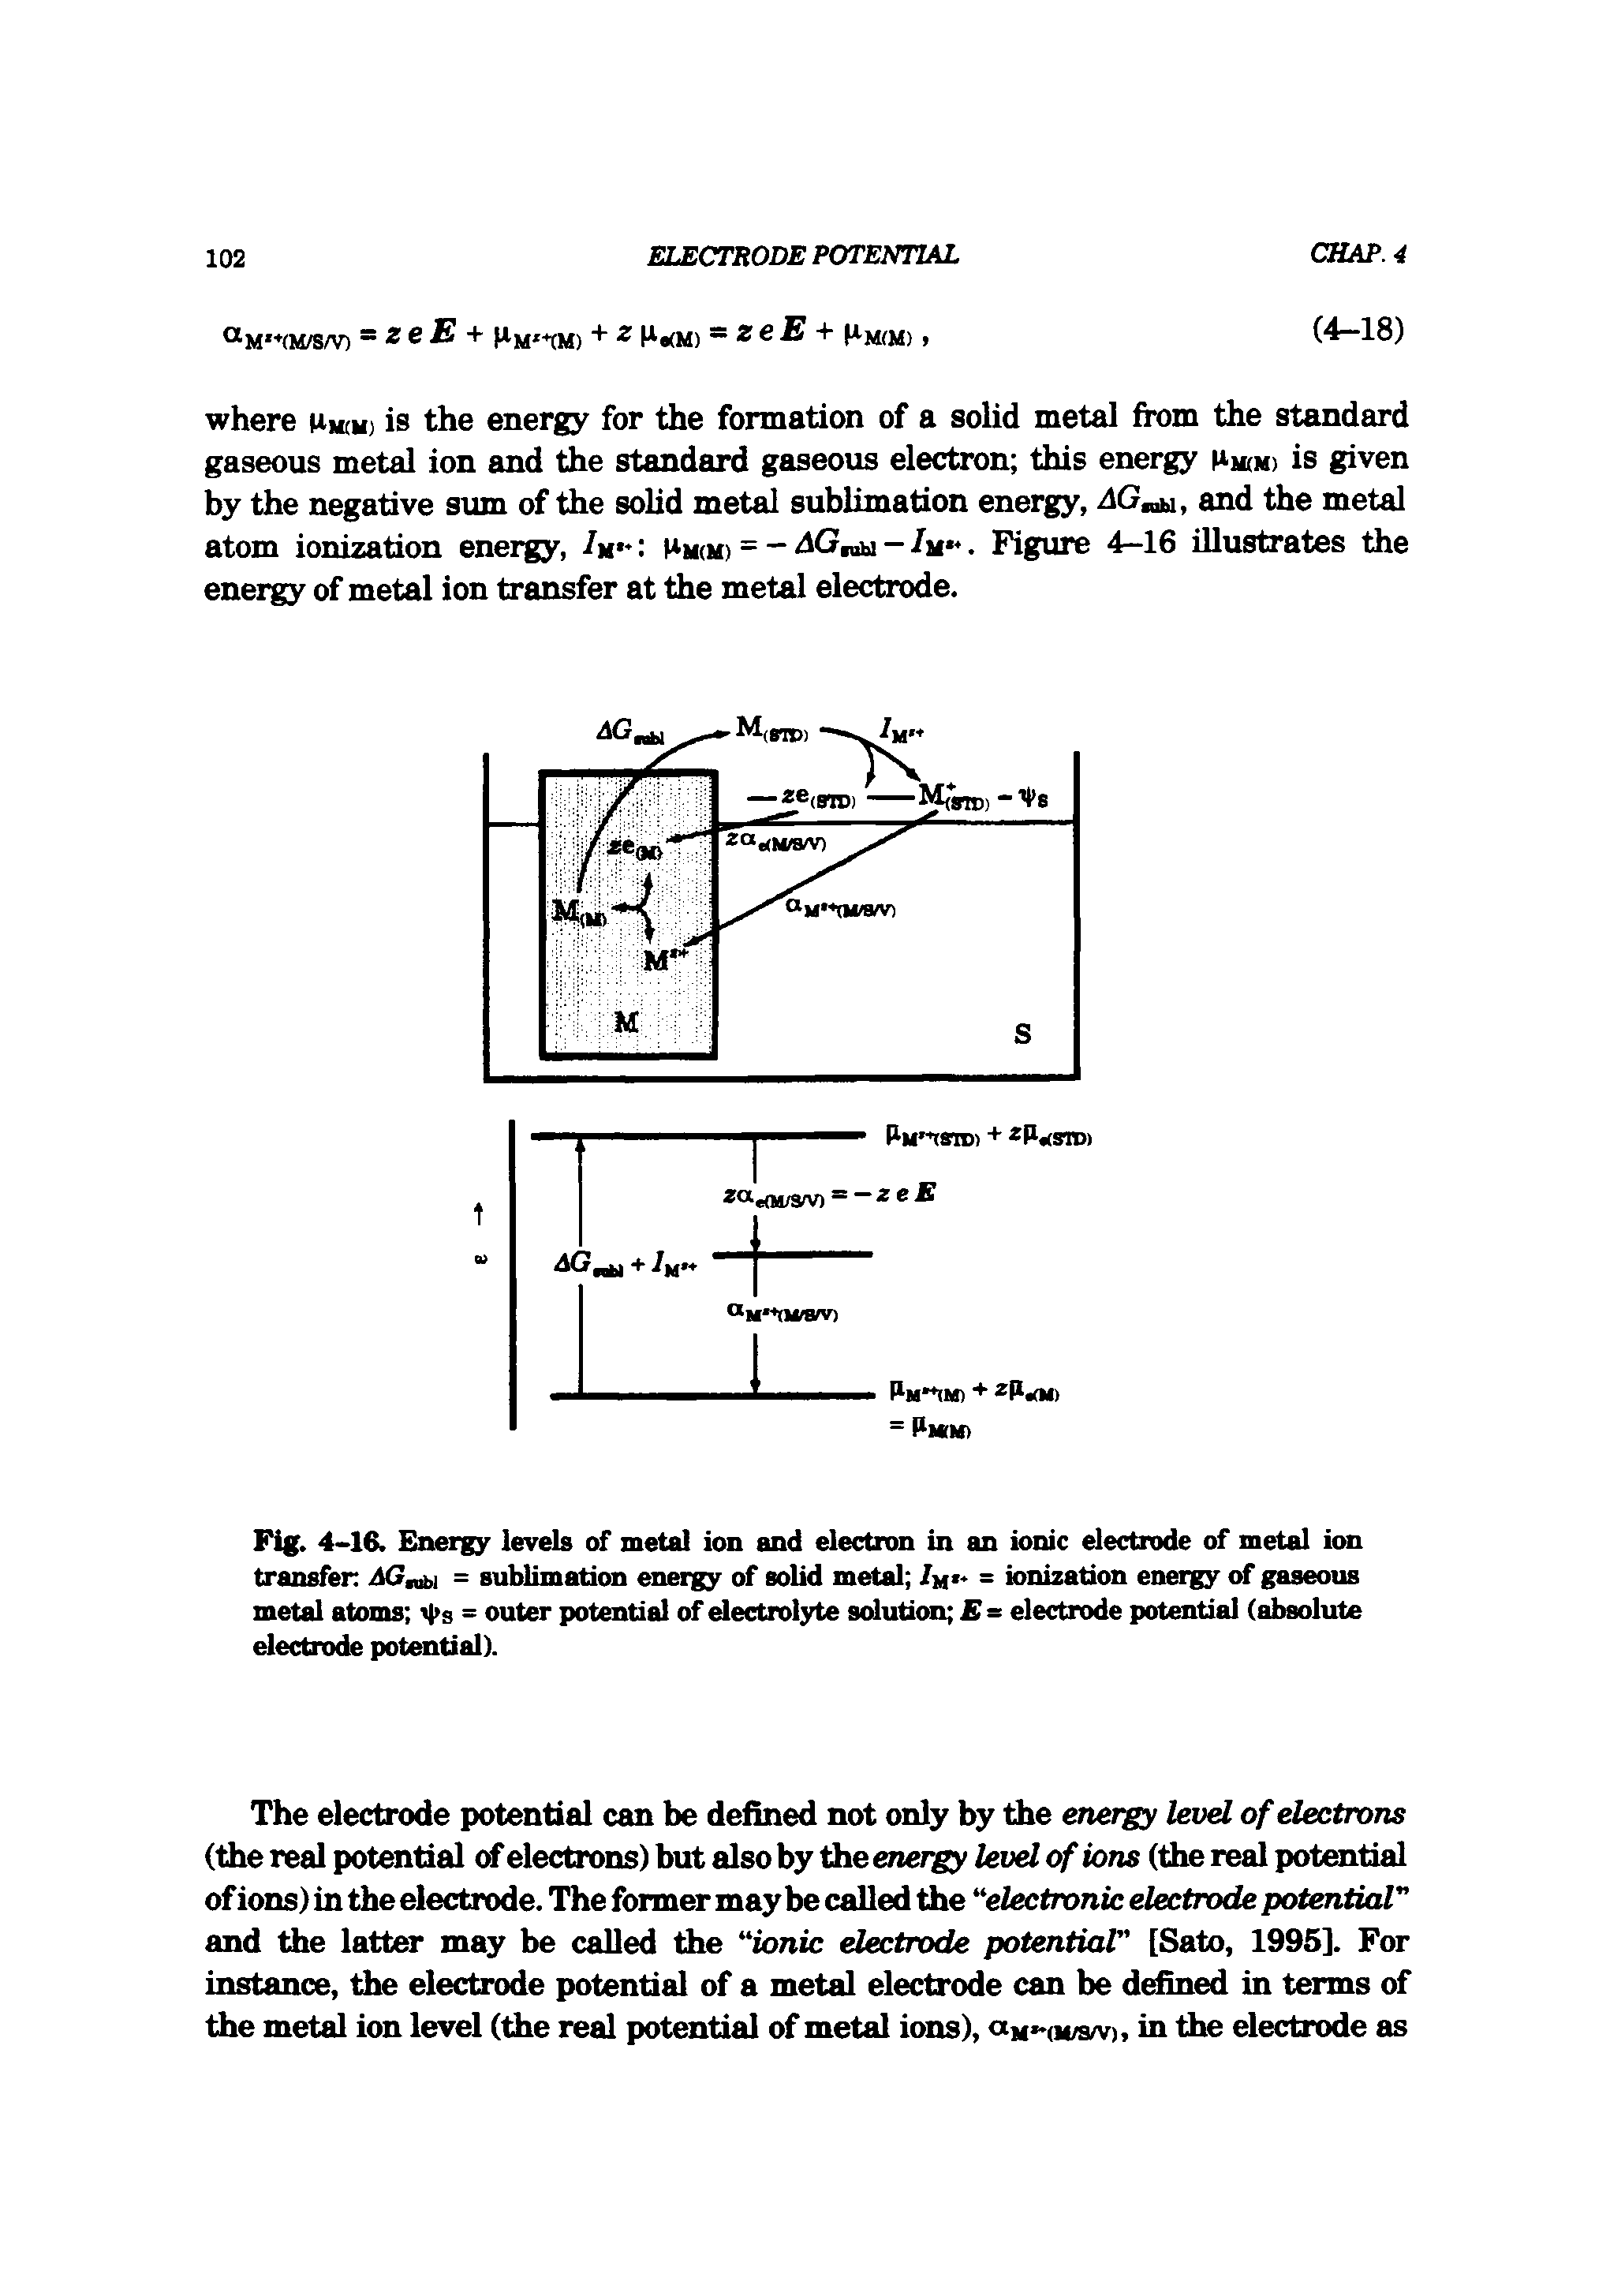 Fig. 4-16. Energy levels of metal ion and electron in an ionic electrode of metal ion transfer 4Cjn i = sublimation energy of solid metal /m" = ionization energy of gaseous metal atoms > >s = outer potential of electrolyte solution E s electrode potential (absolute electrode potential).